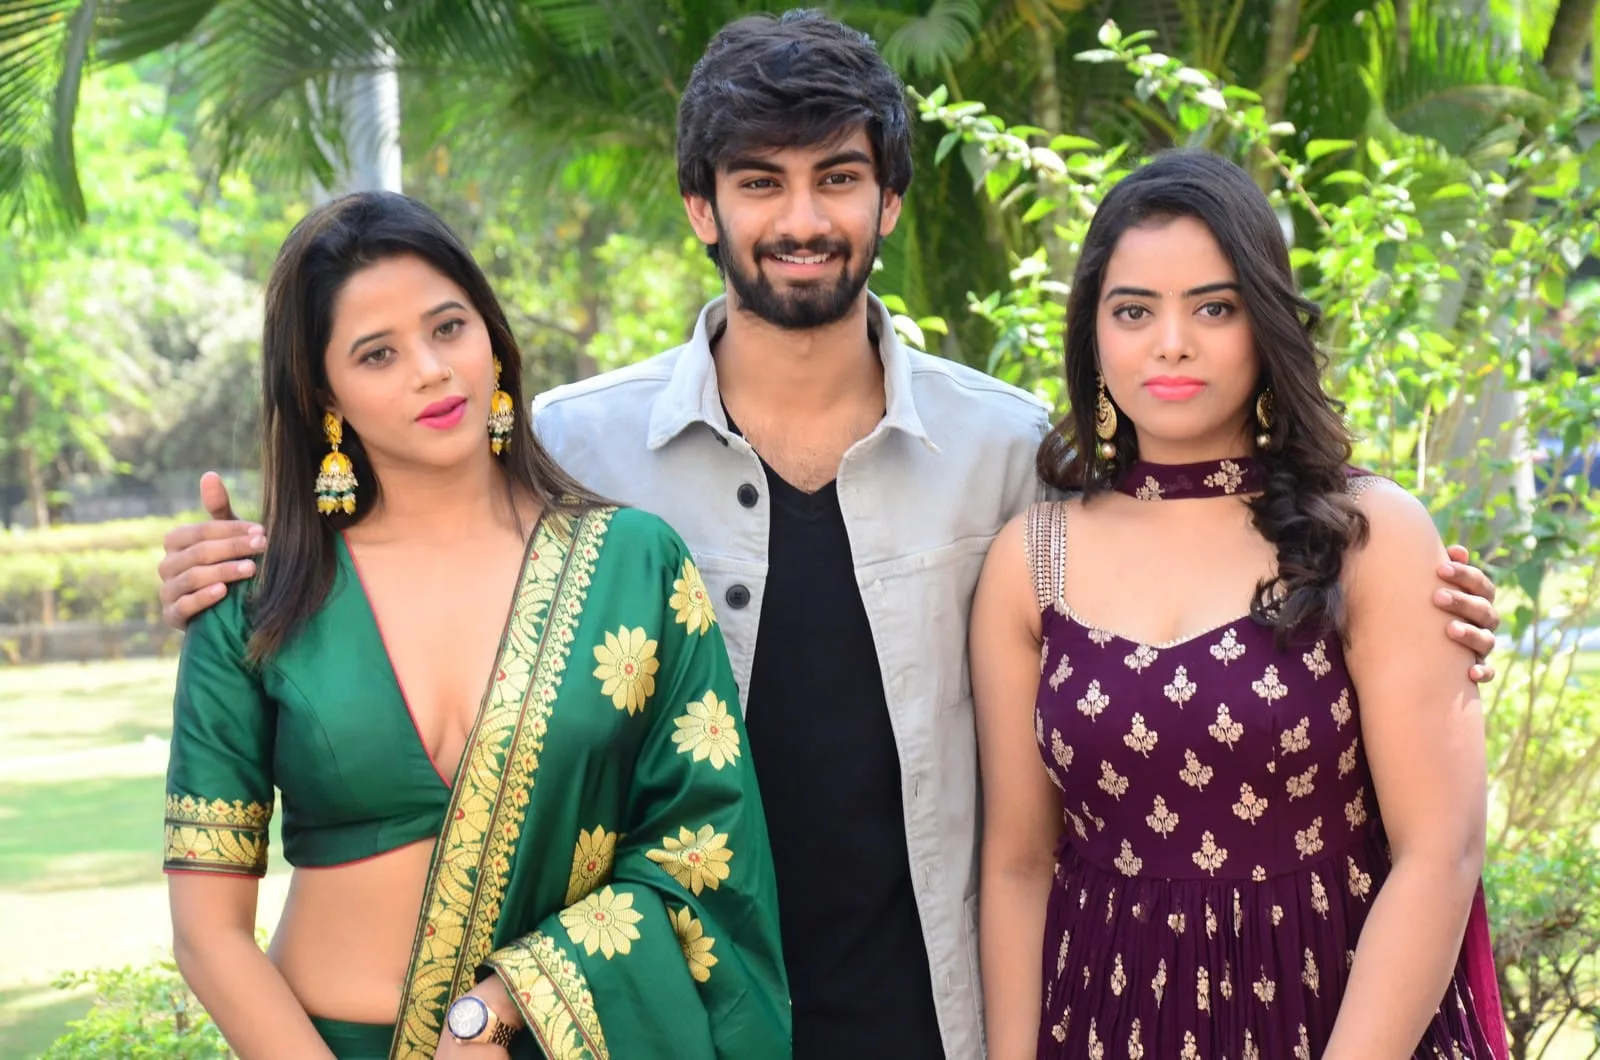 Hero Ram Karthik released the trailer of the youthful entertainer Chicklets